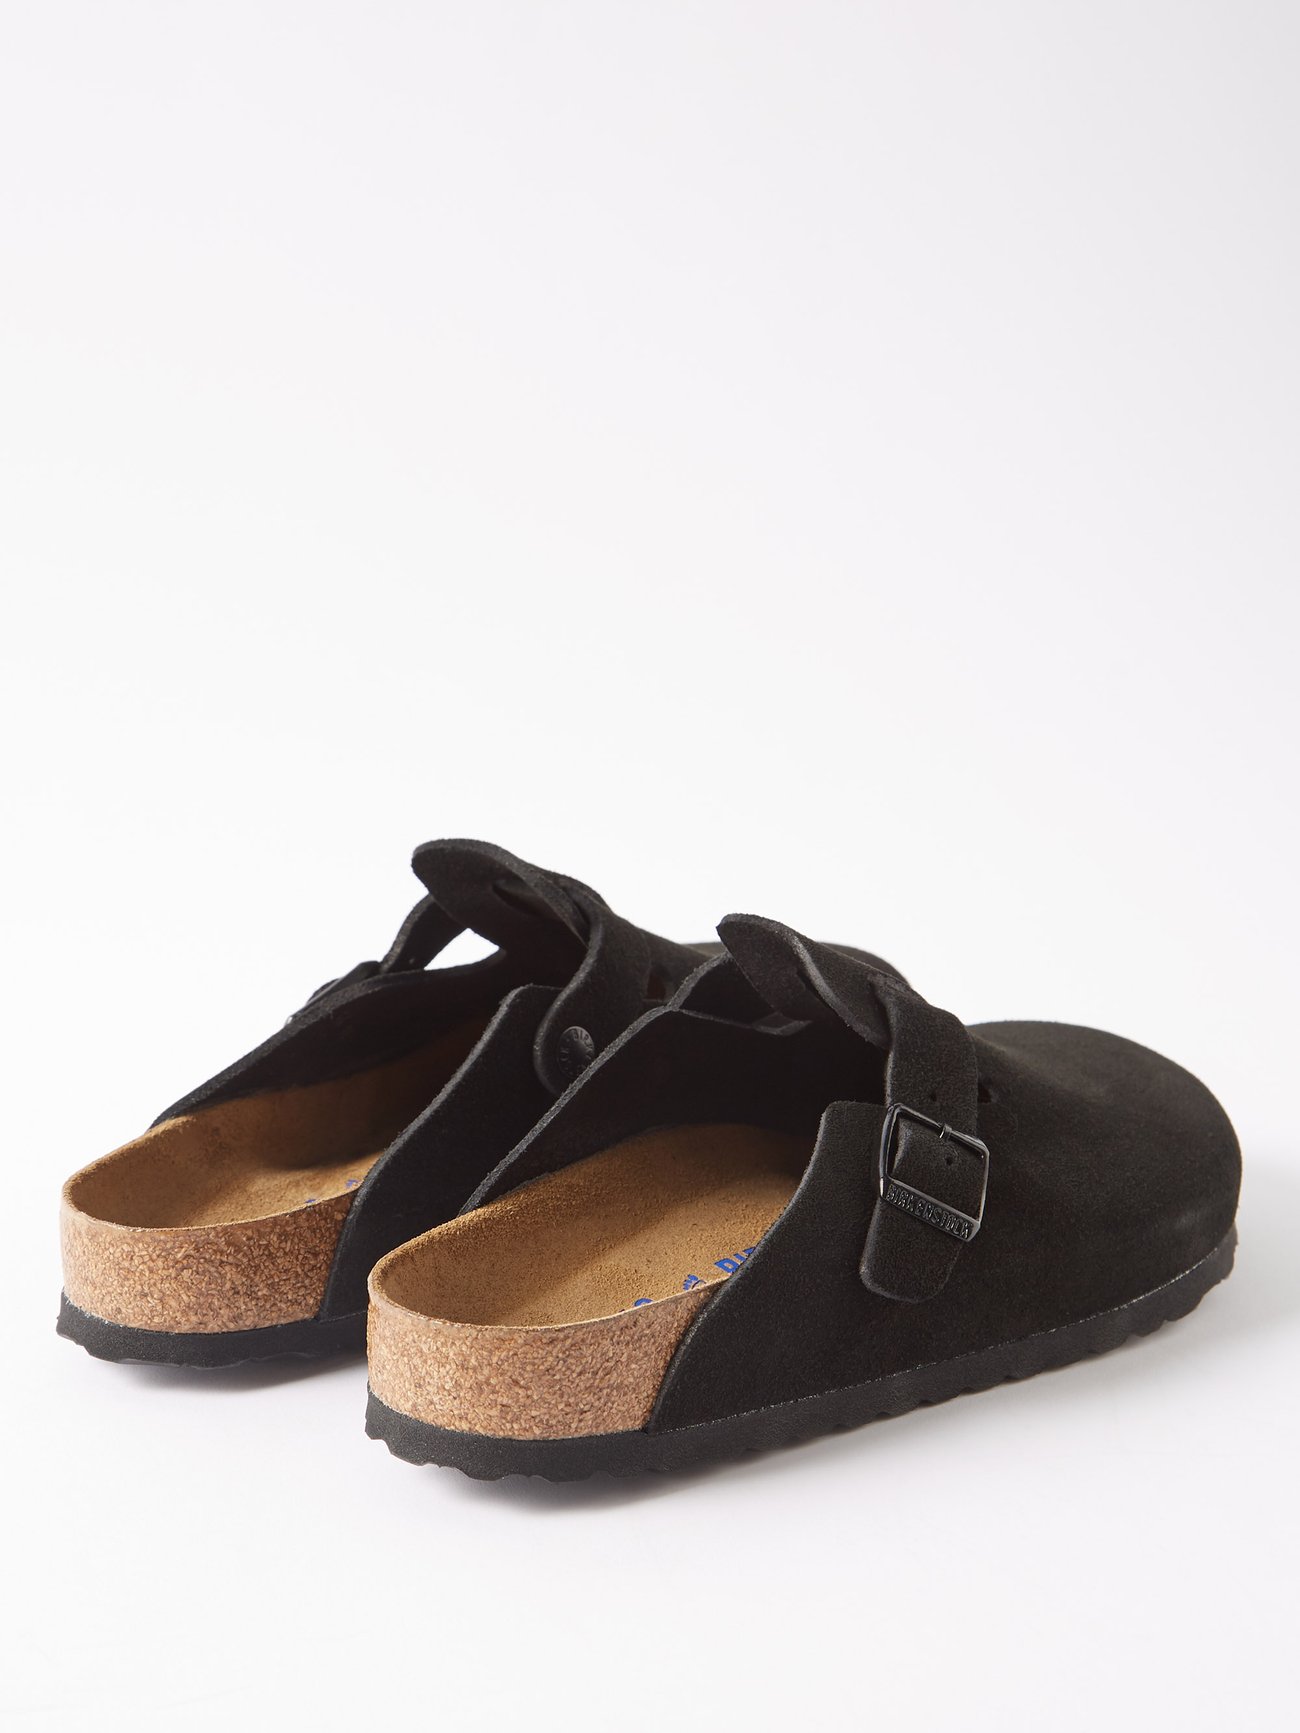 Boston buckled suede clogs